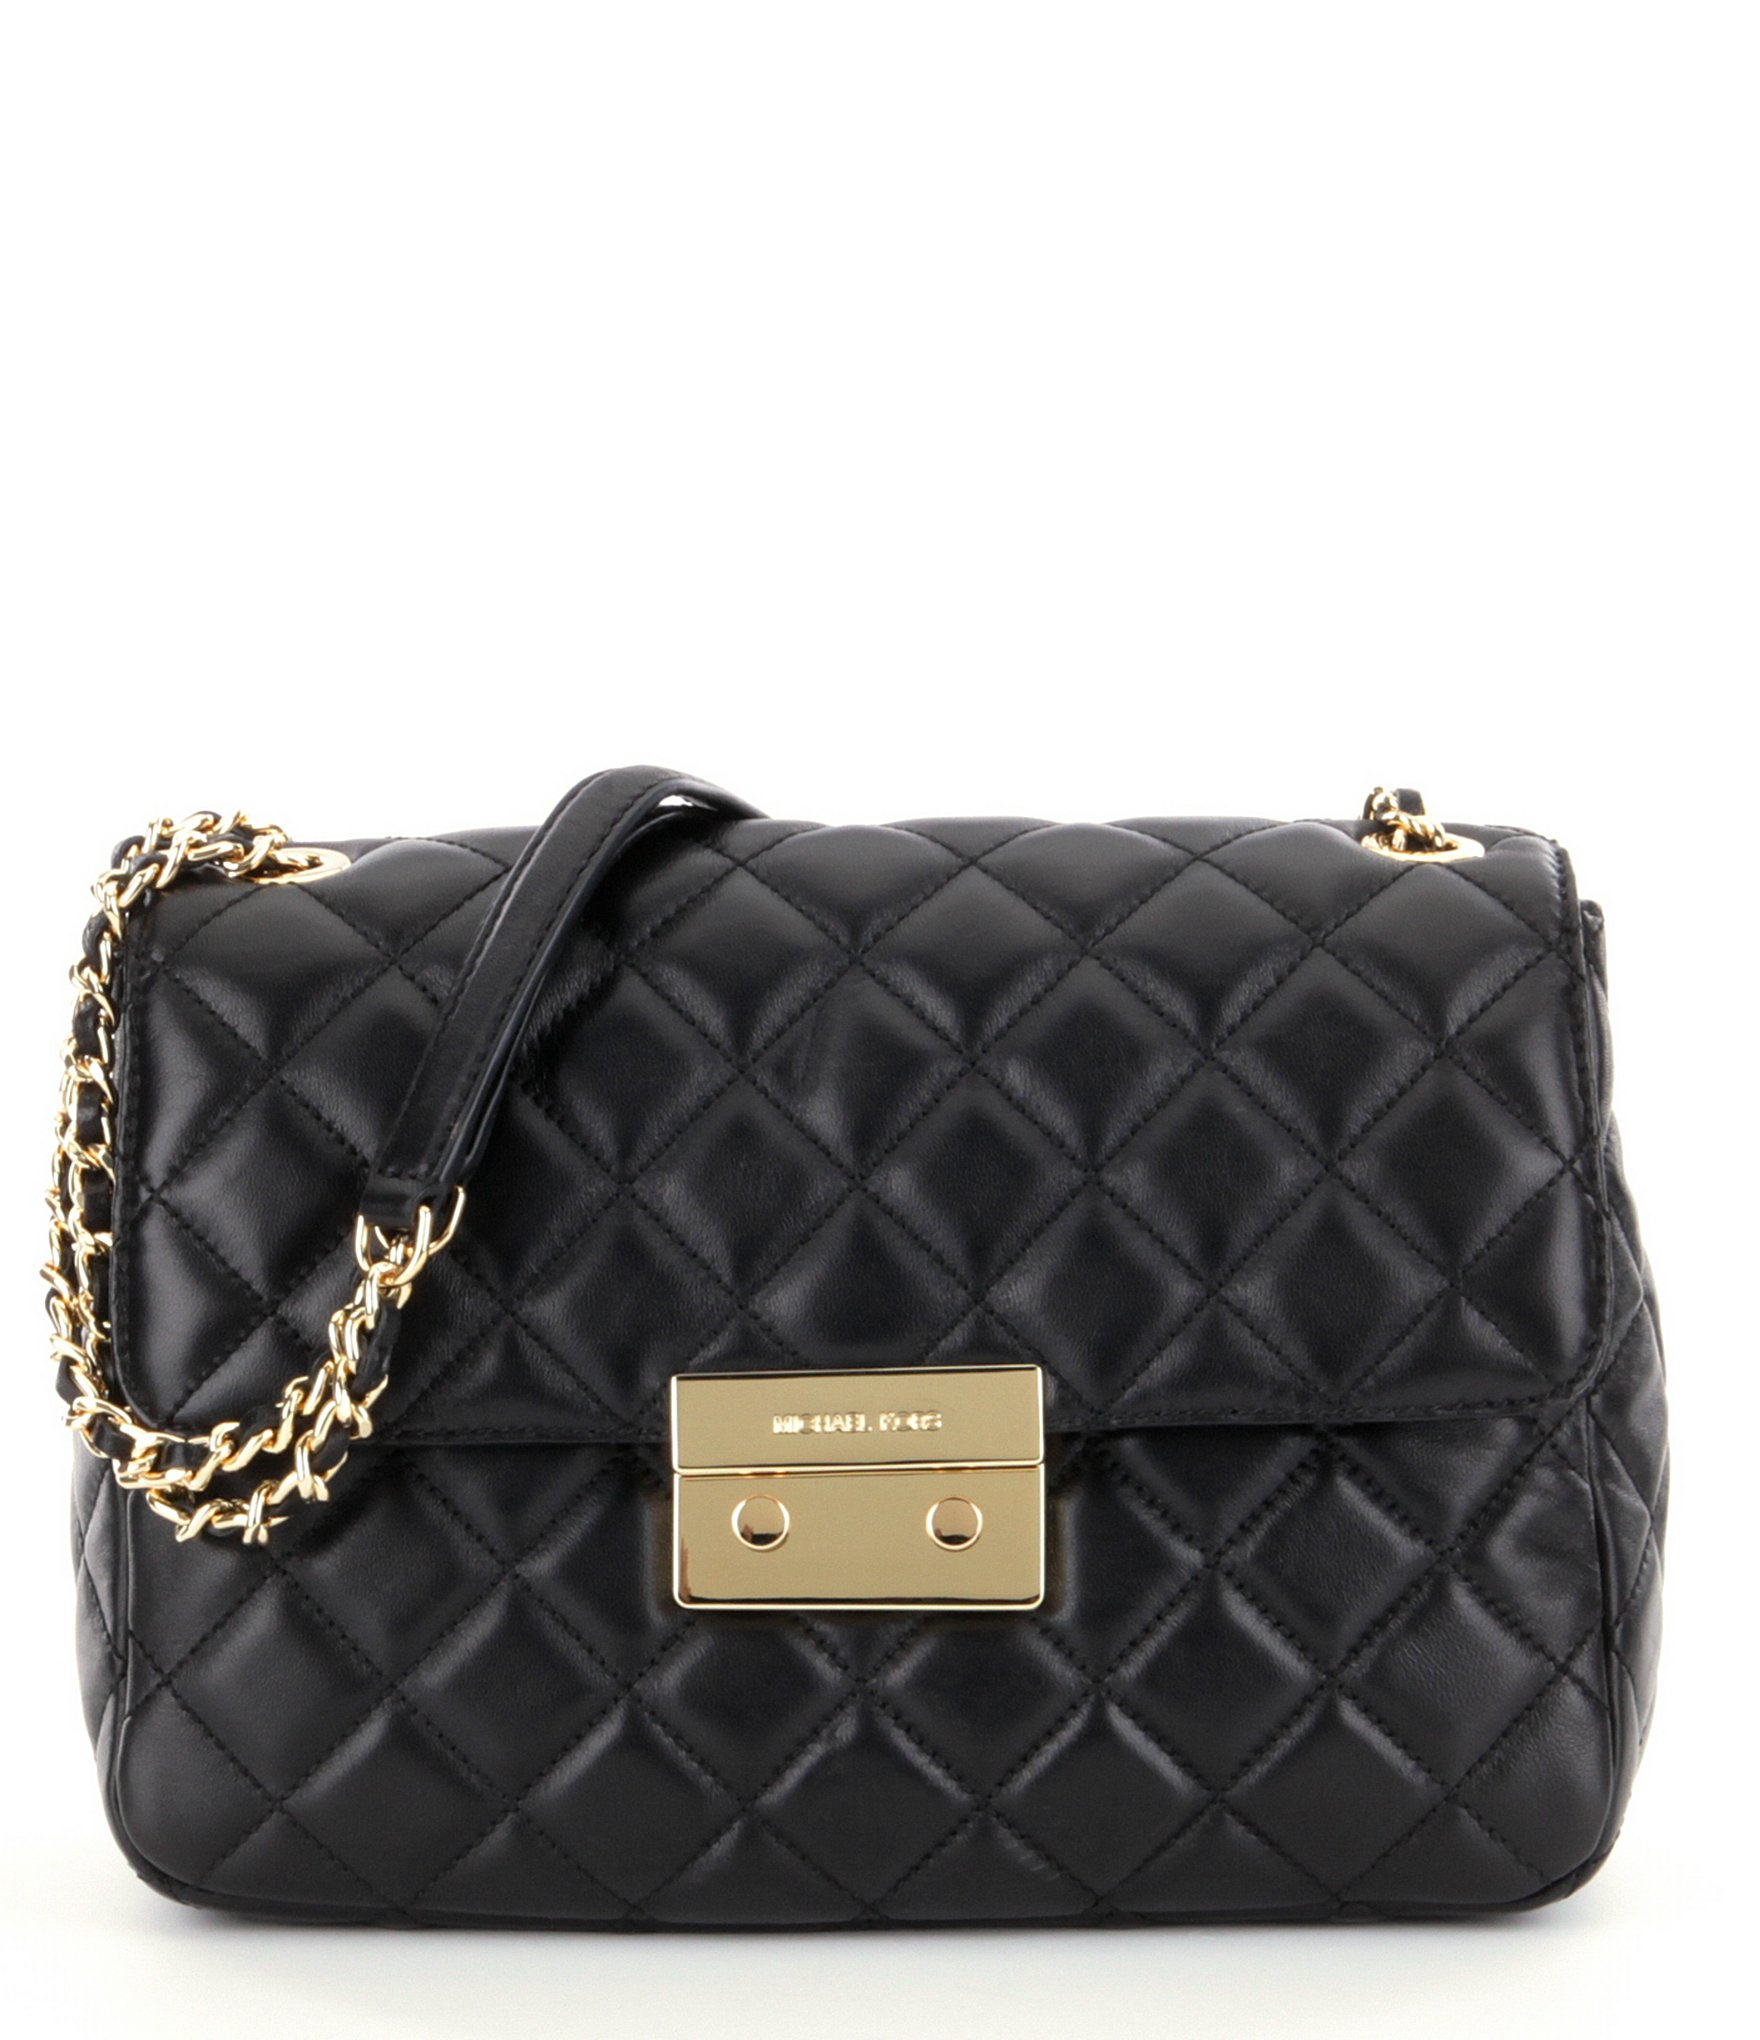 MICHAEL Michael Kors Sloan XL Chain Quilted Leather Shoulder Bag in ...